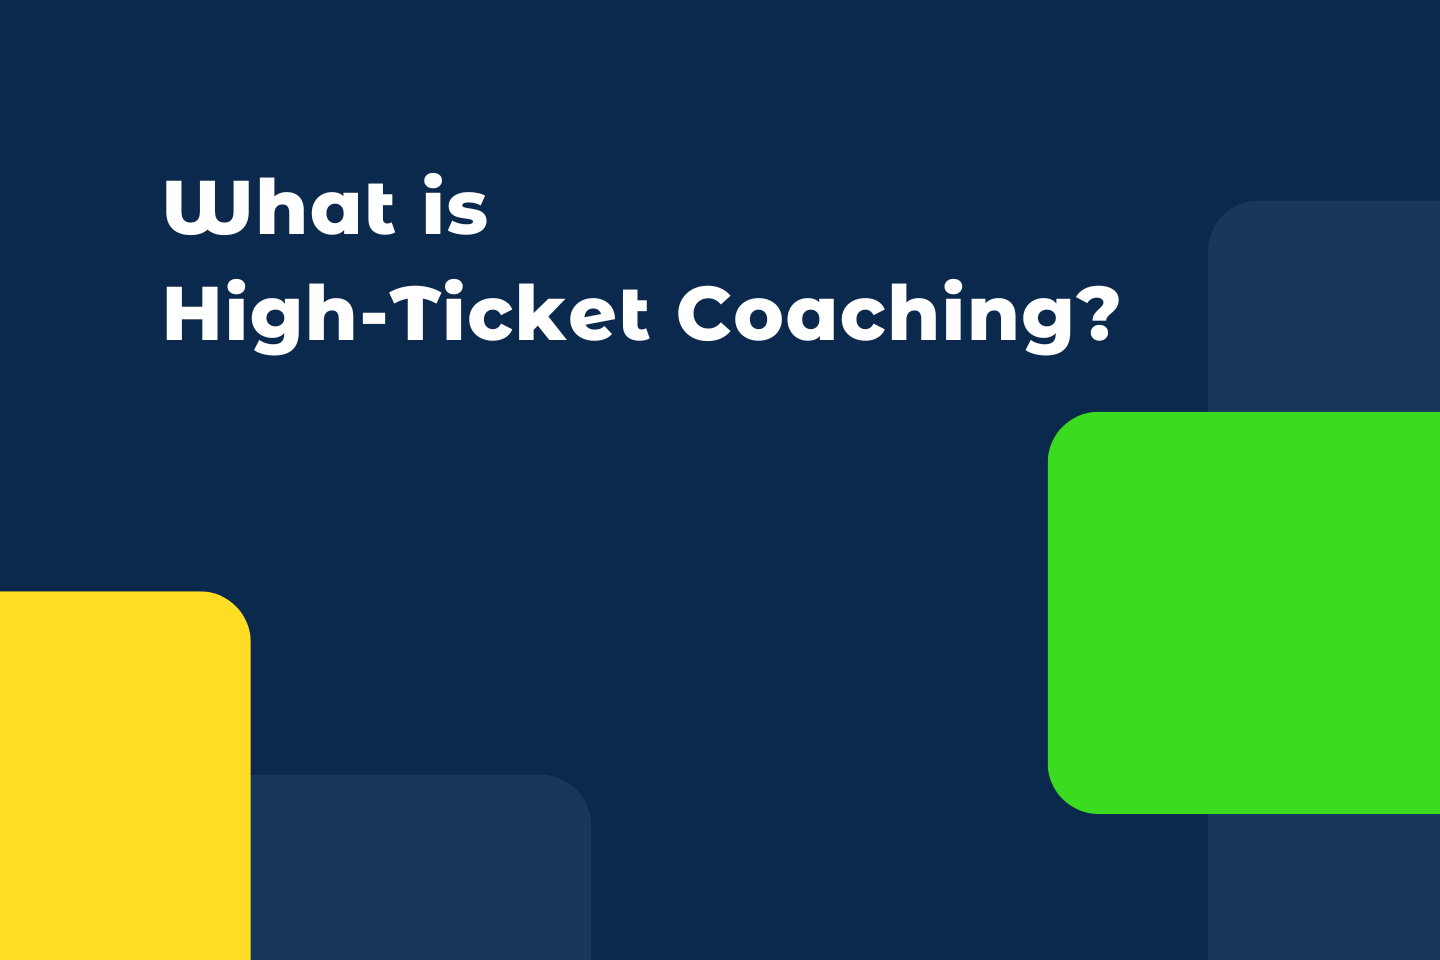 What is High-Ticket Coaching?